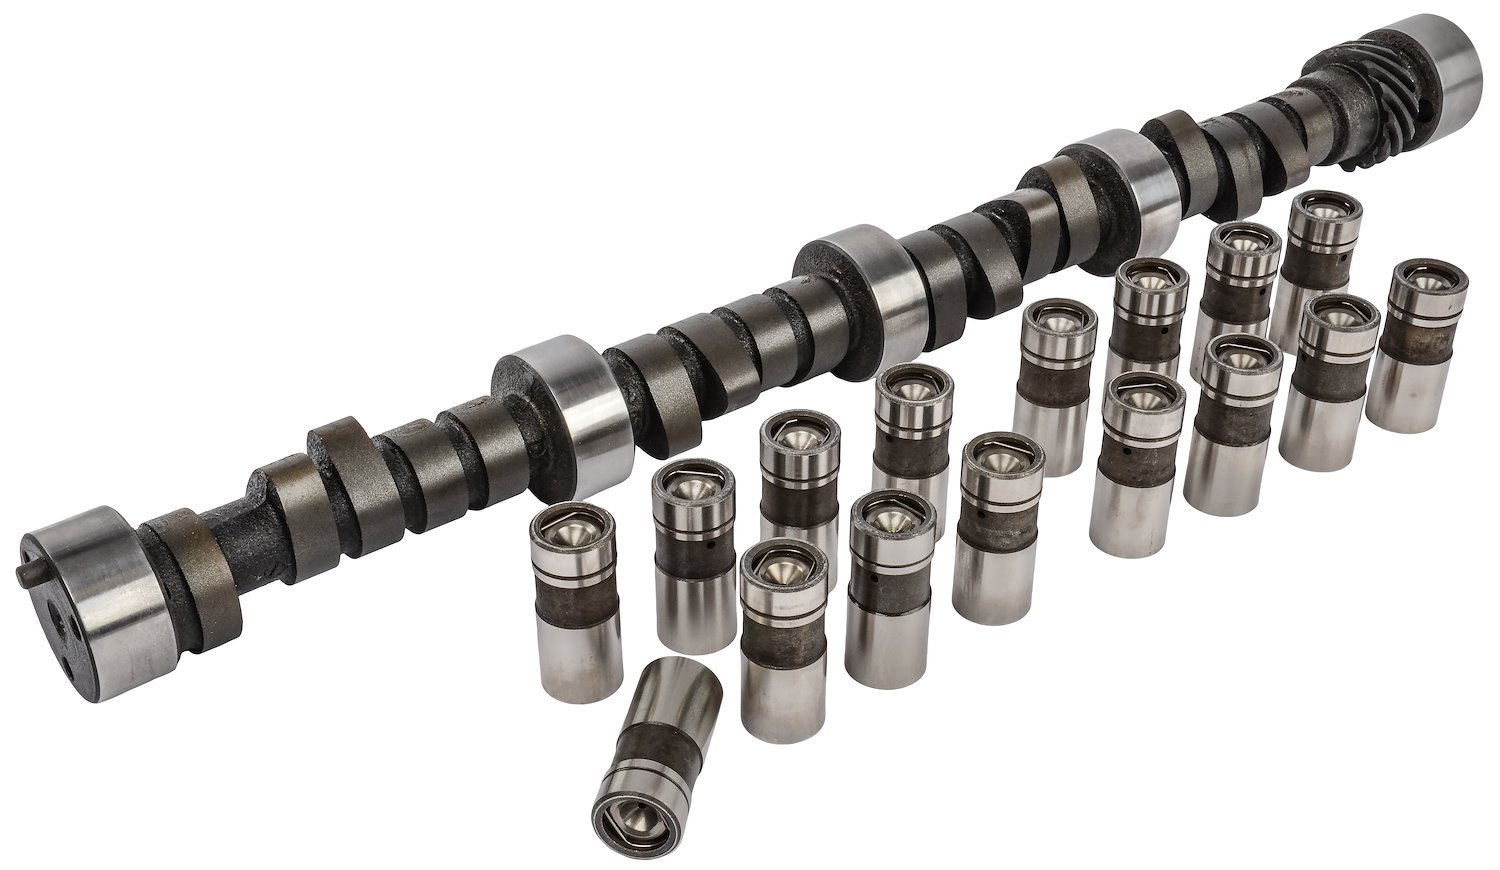 Hydraulic Flat Tappet Camshaft & Lifters for 1957-1985 Chevy 262-400